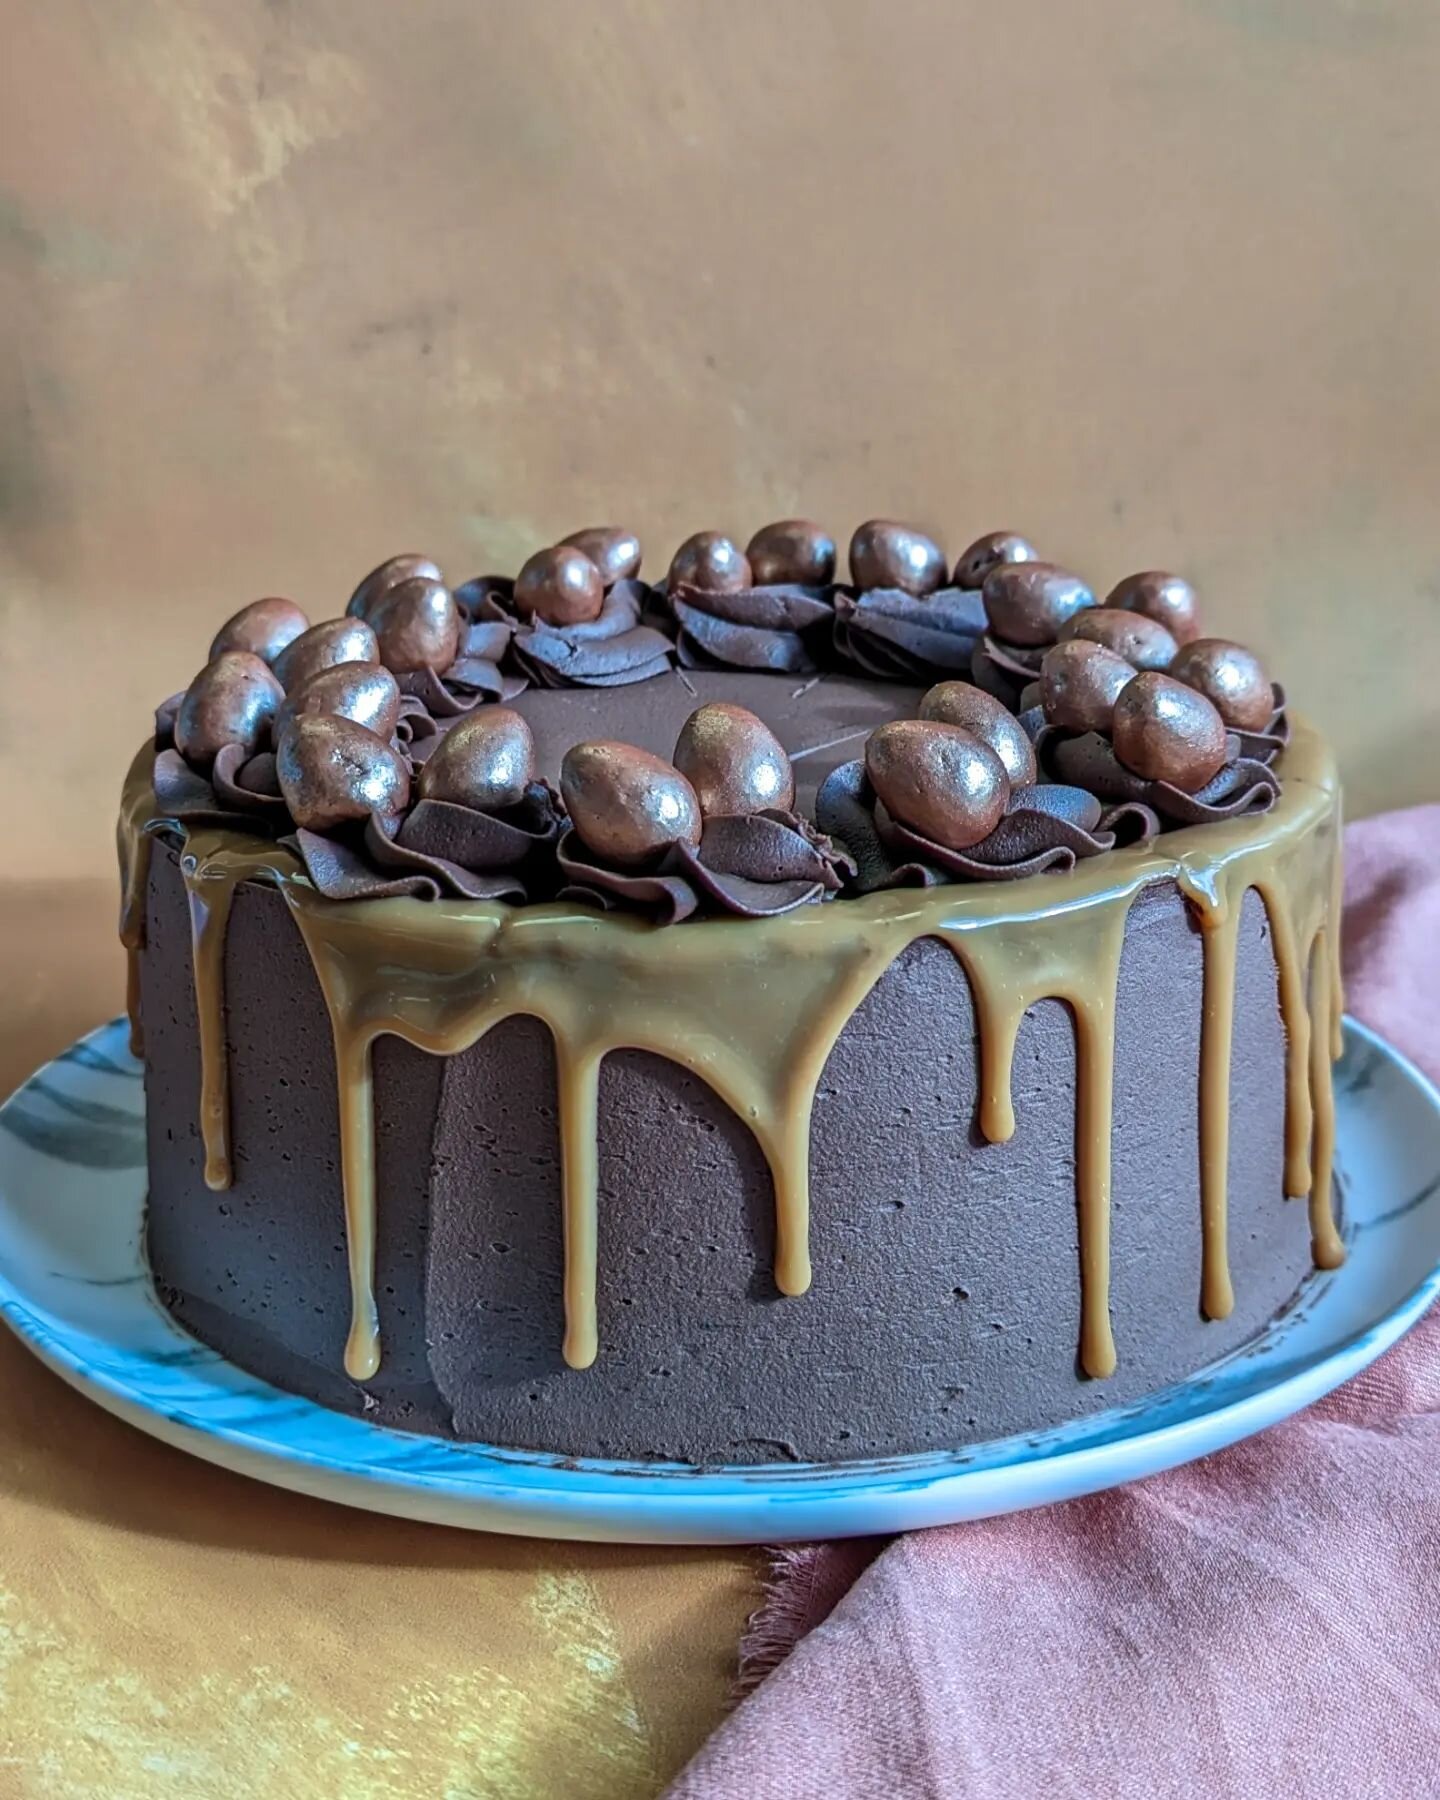 Happy Easter week Folks! 

I dropped off this Chocolate &amp; Caramel cake at @jillscoffeeshop this morning, ready to be devoured 🍴

Very jealous I can't have a slice myself....